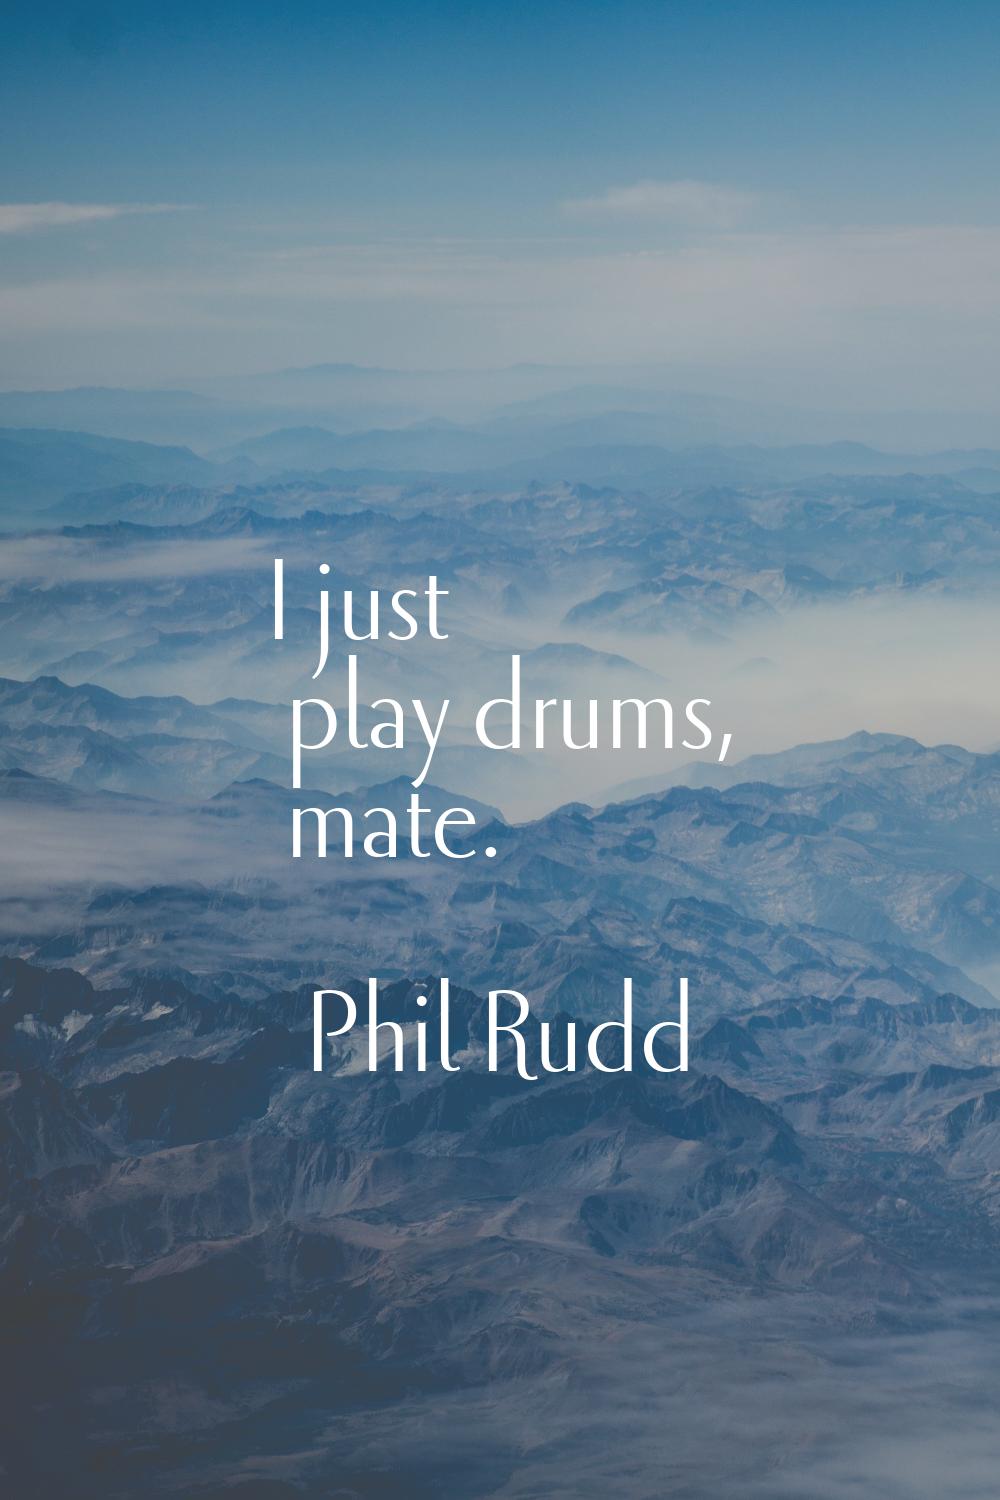 I just play drums, mate.